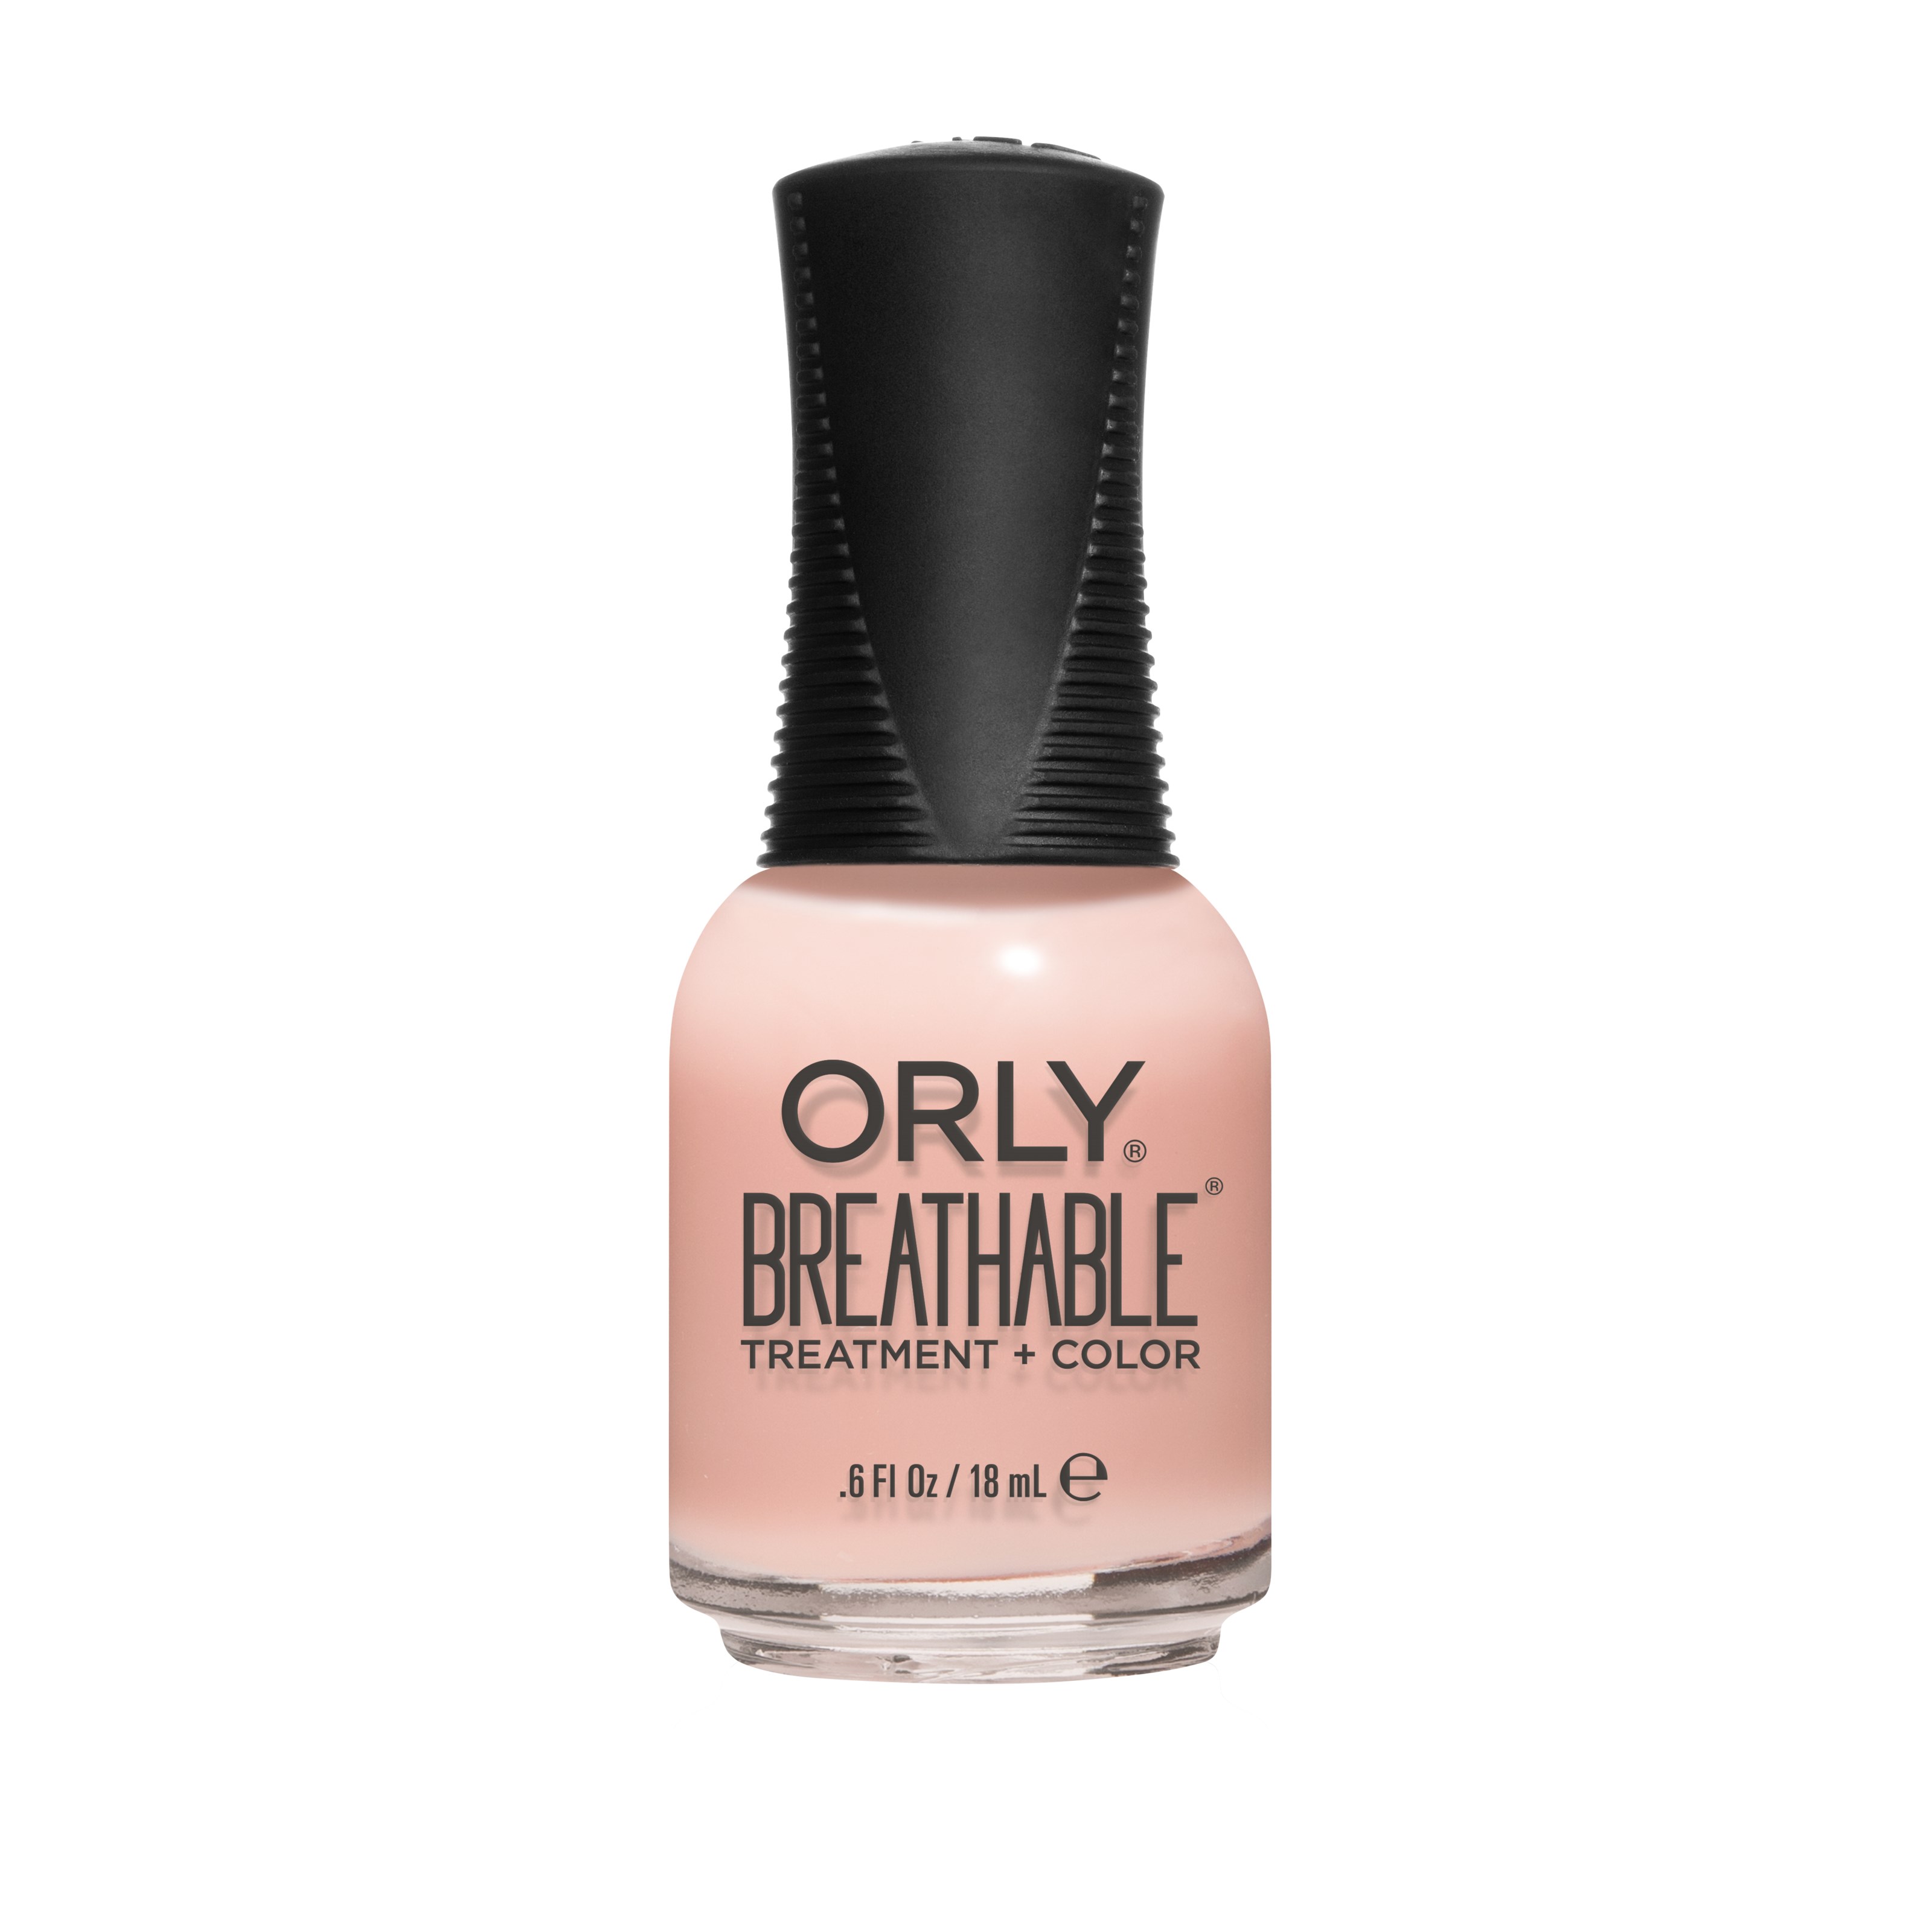 ORLY Breathable Kiss Me, IM Kind